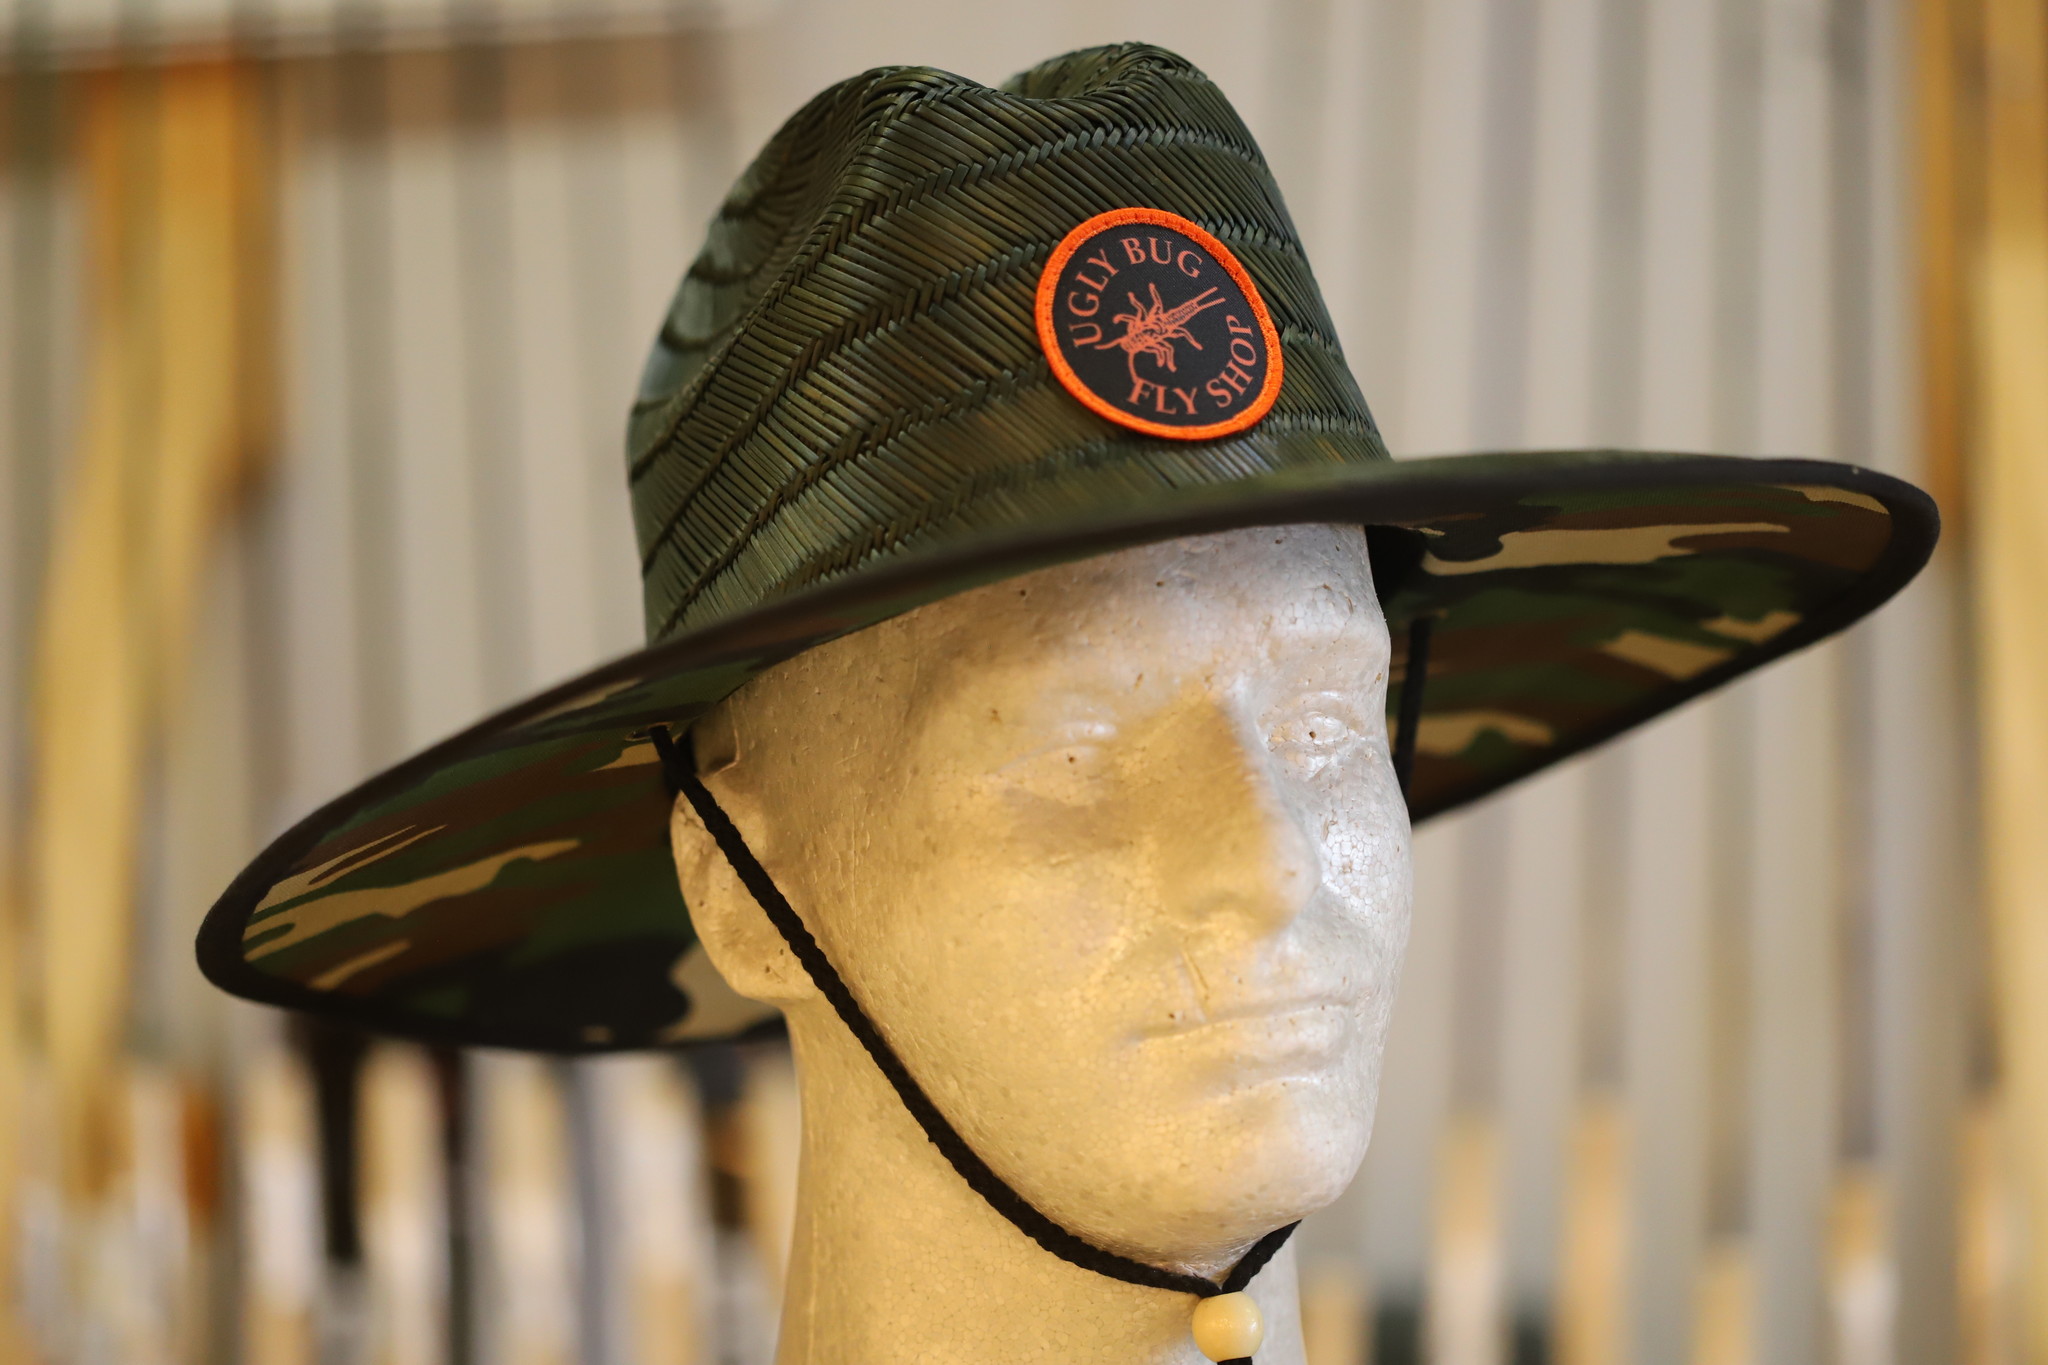 https://cdn.shoplightspeed.com/shops/607759/files/48018649/richardson-olive-straw-hat-with-camo-and-ugly-bug.jpg